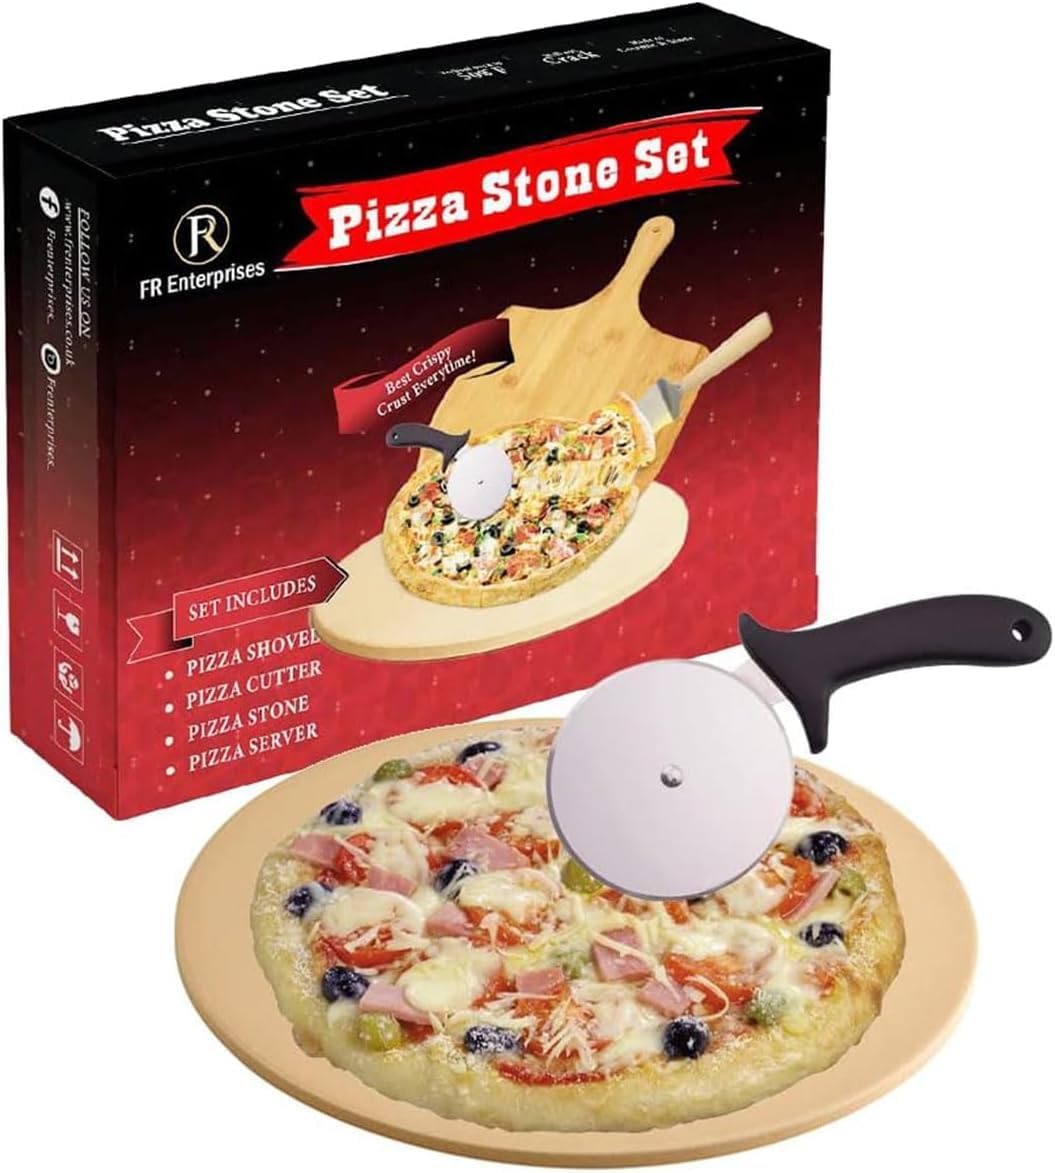 Pizza Stone Set for Oven - Round Stone with Pizza Peel and Cutter